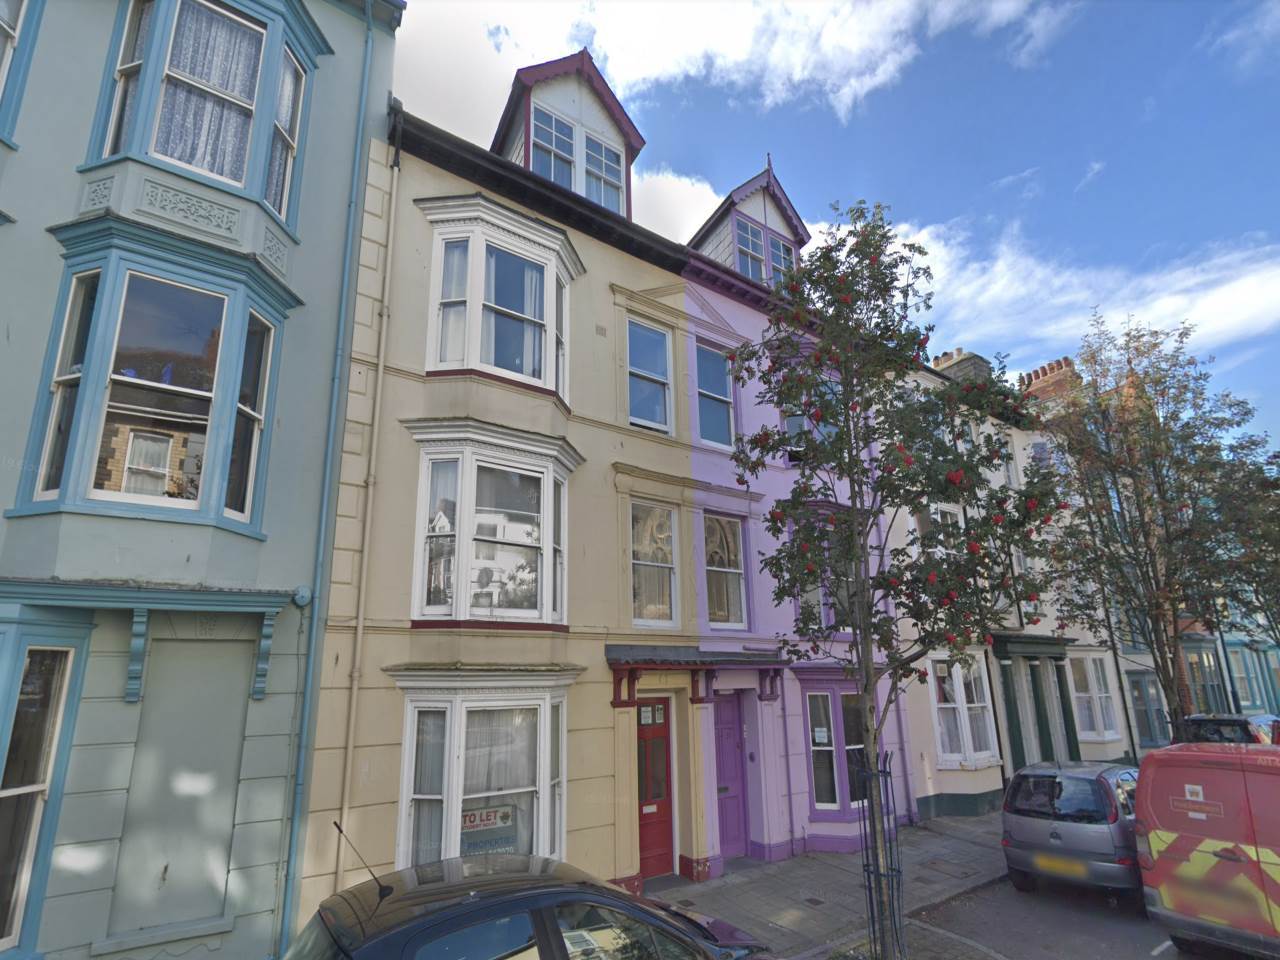 1 bed house / flat share to rent in Portland Street, Aberystwyth  - Property Image 1